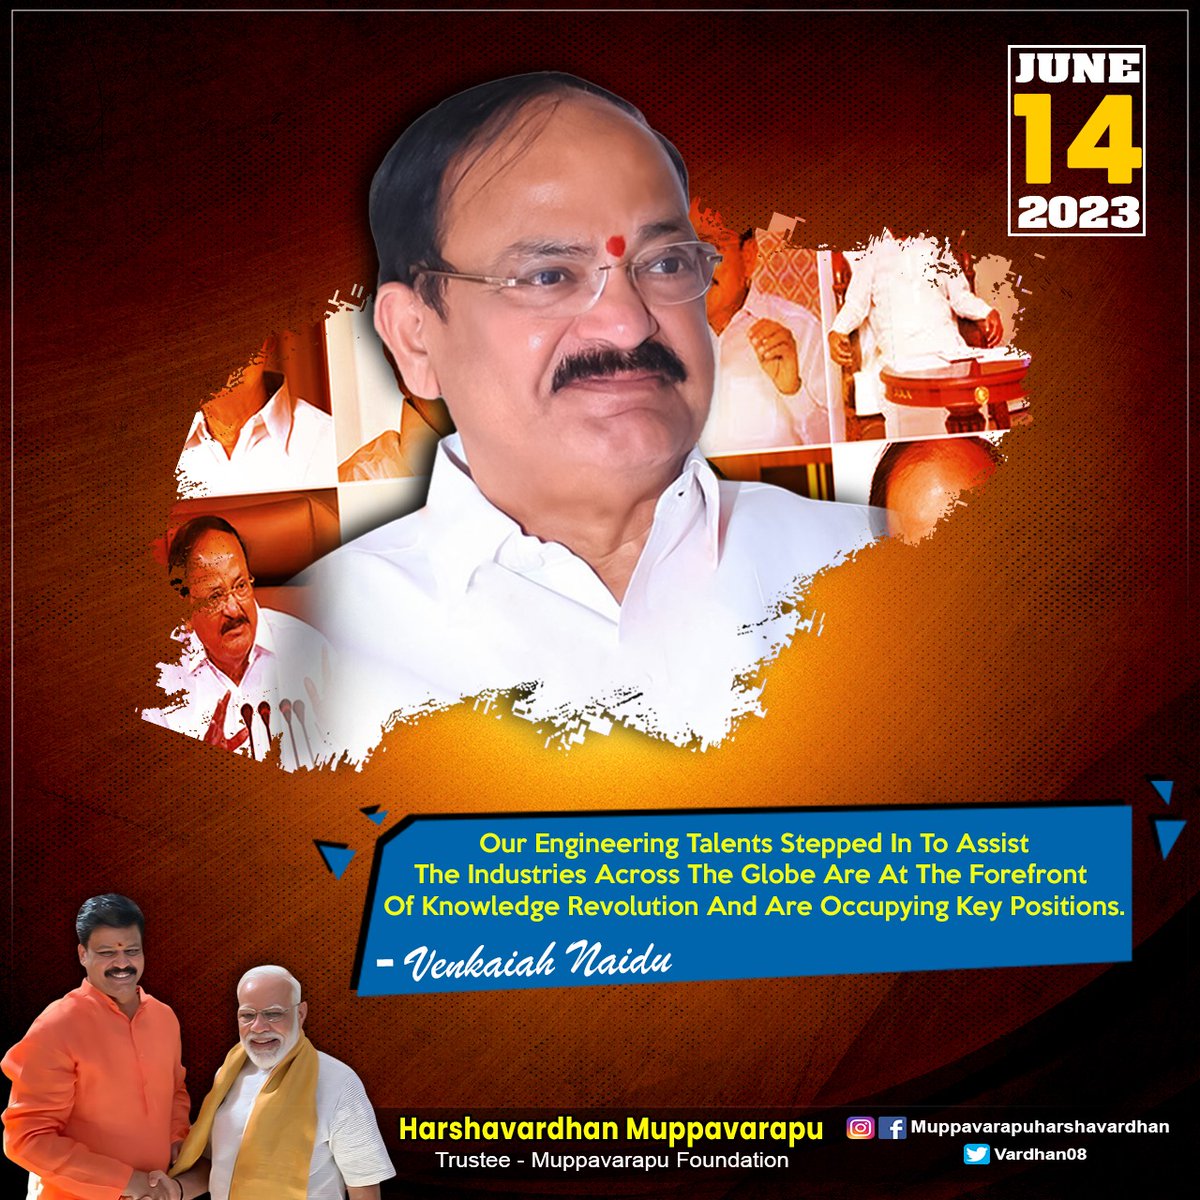 Our engineering talents stepped in to assist the industries across the globe are at the forefront of knowledge revolution and are occupying key positions.

- #VenkaiahNaidu

#GoodMorningEveryone 💐